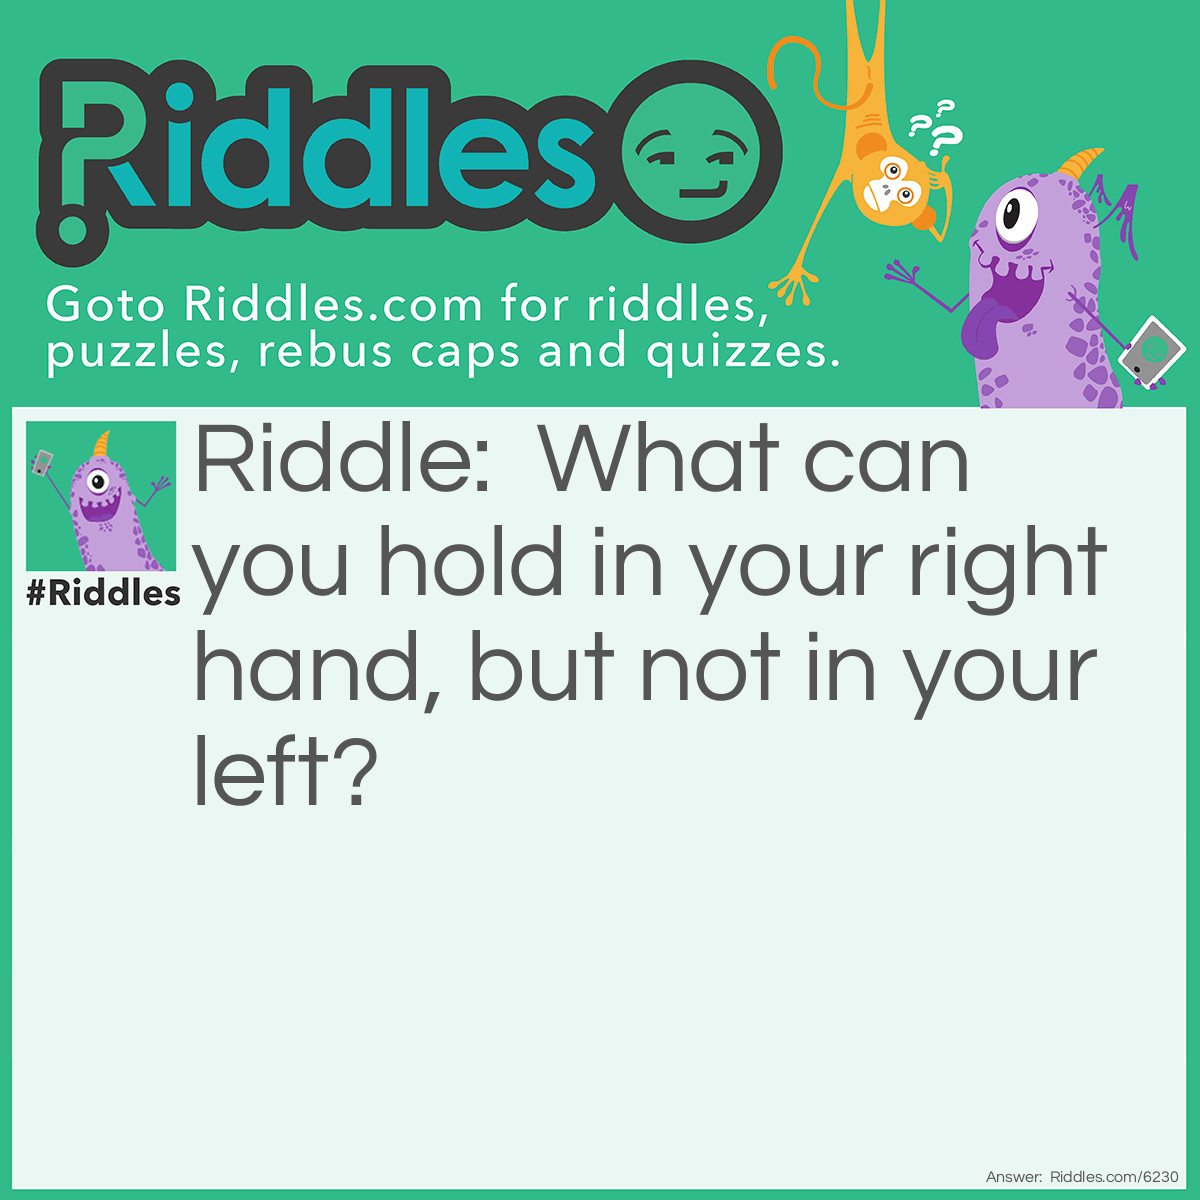 Riddle: What can you hold in your right hand, but not in your left? Answer: Your left hand!